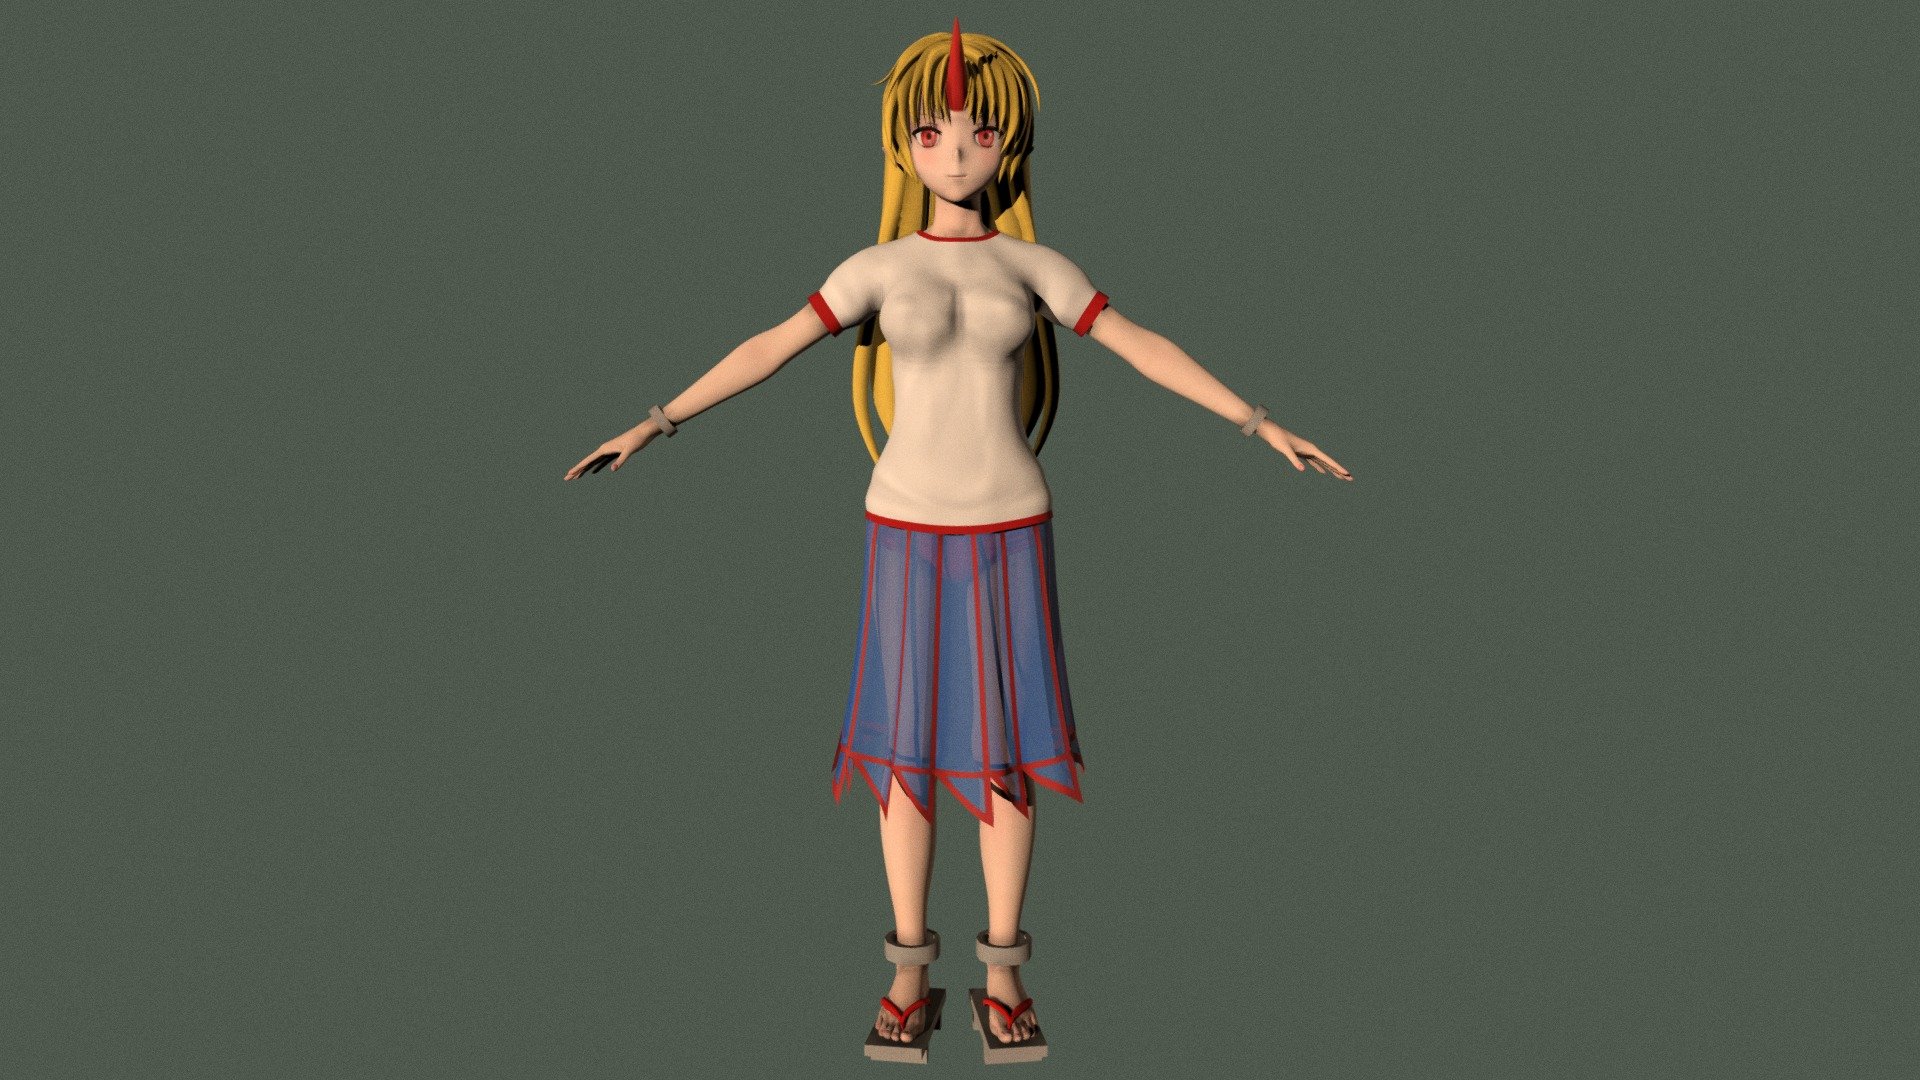 T-pose rigged model of anime girl Yuugi Hoshiguma (Touhou).

Body and clothings are rigged and skinned by 3ds Max CAT system.

Eye direction and facial animation controlled by Morpher modifier / Shape Keys / Blendshape.

This product include .FBX (ver. 7200) and .MAX (ver. 2010) files.

3ds Max version is turbosmoothed to give a high quality render (as you can see here).

Original main body mesh have ~7.000 polys.

This 3D model may need some tweaking to adapt the rig system to games engine and other platforms.

I support convert model to various file formats (the rig data will be lost in this process): 3DS; AI; ASE; DAE; DWF; DWG; DXF; FLT; HTR; IGS; M3G; MQO; OBJ; SAT; STL; W3D; WRL; X.

You can buy all of my models in one pack to save cost: https://sketchfab.com/3d-models/all-of-my-anime-girls-c5a56156994e4193b9e8fa21a3b8360b

And I can make commission models.

If you have any questions, please leave a comment or contact me via my email 3d.eden.project@gmail.com 3d model